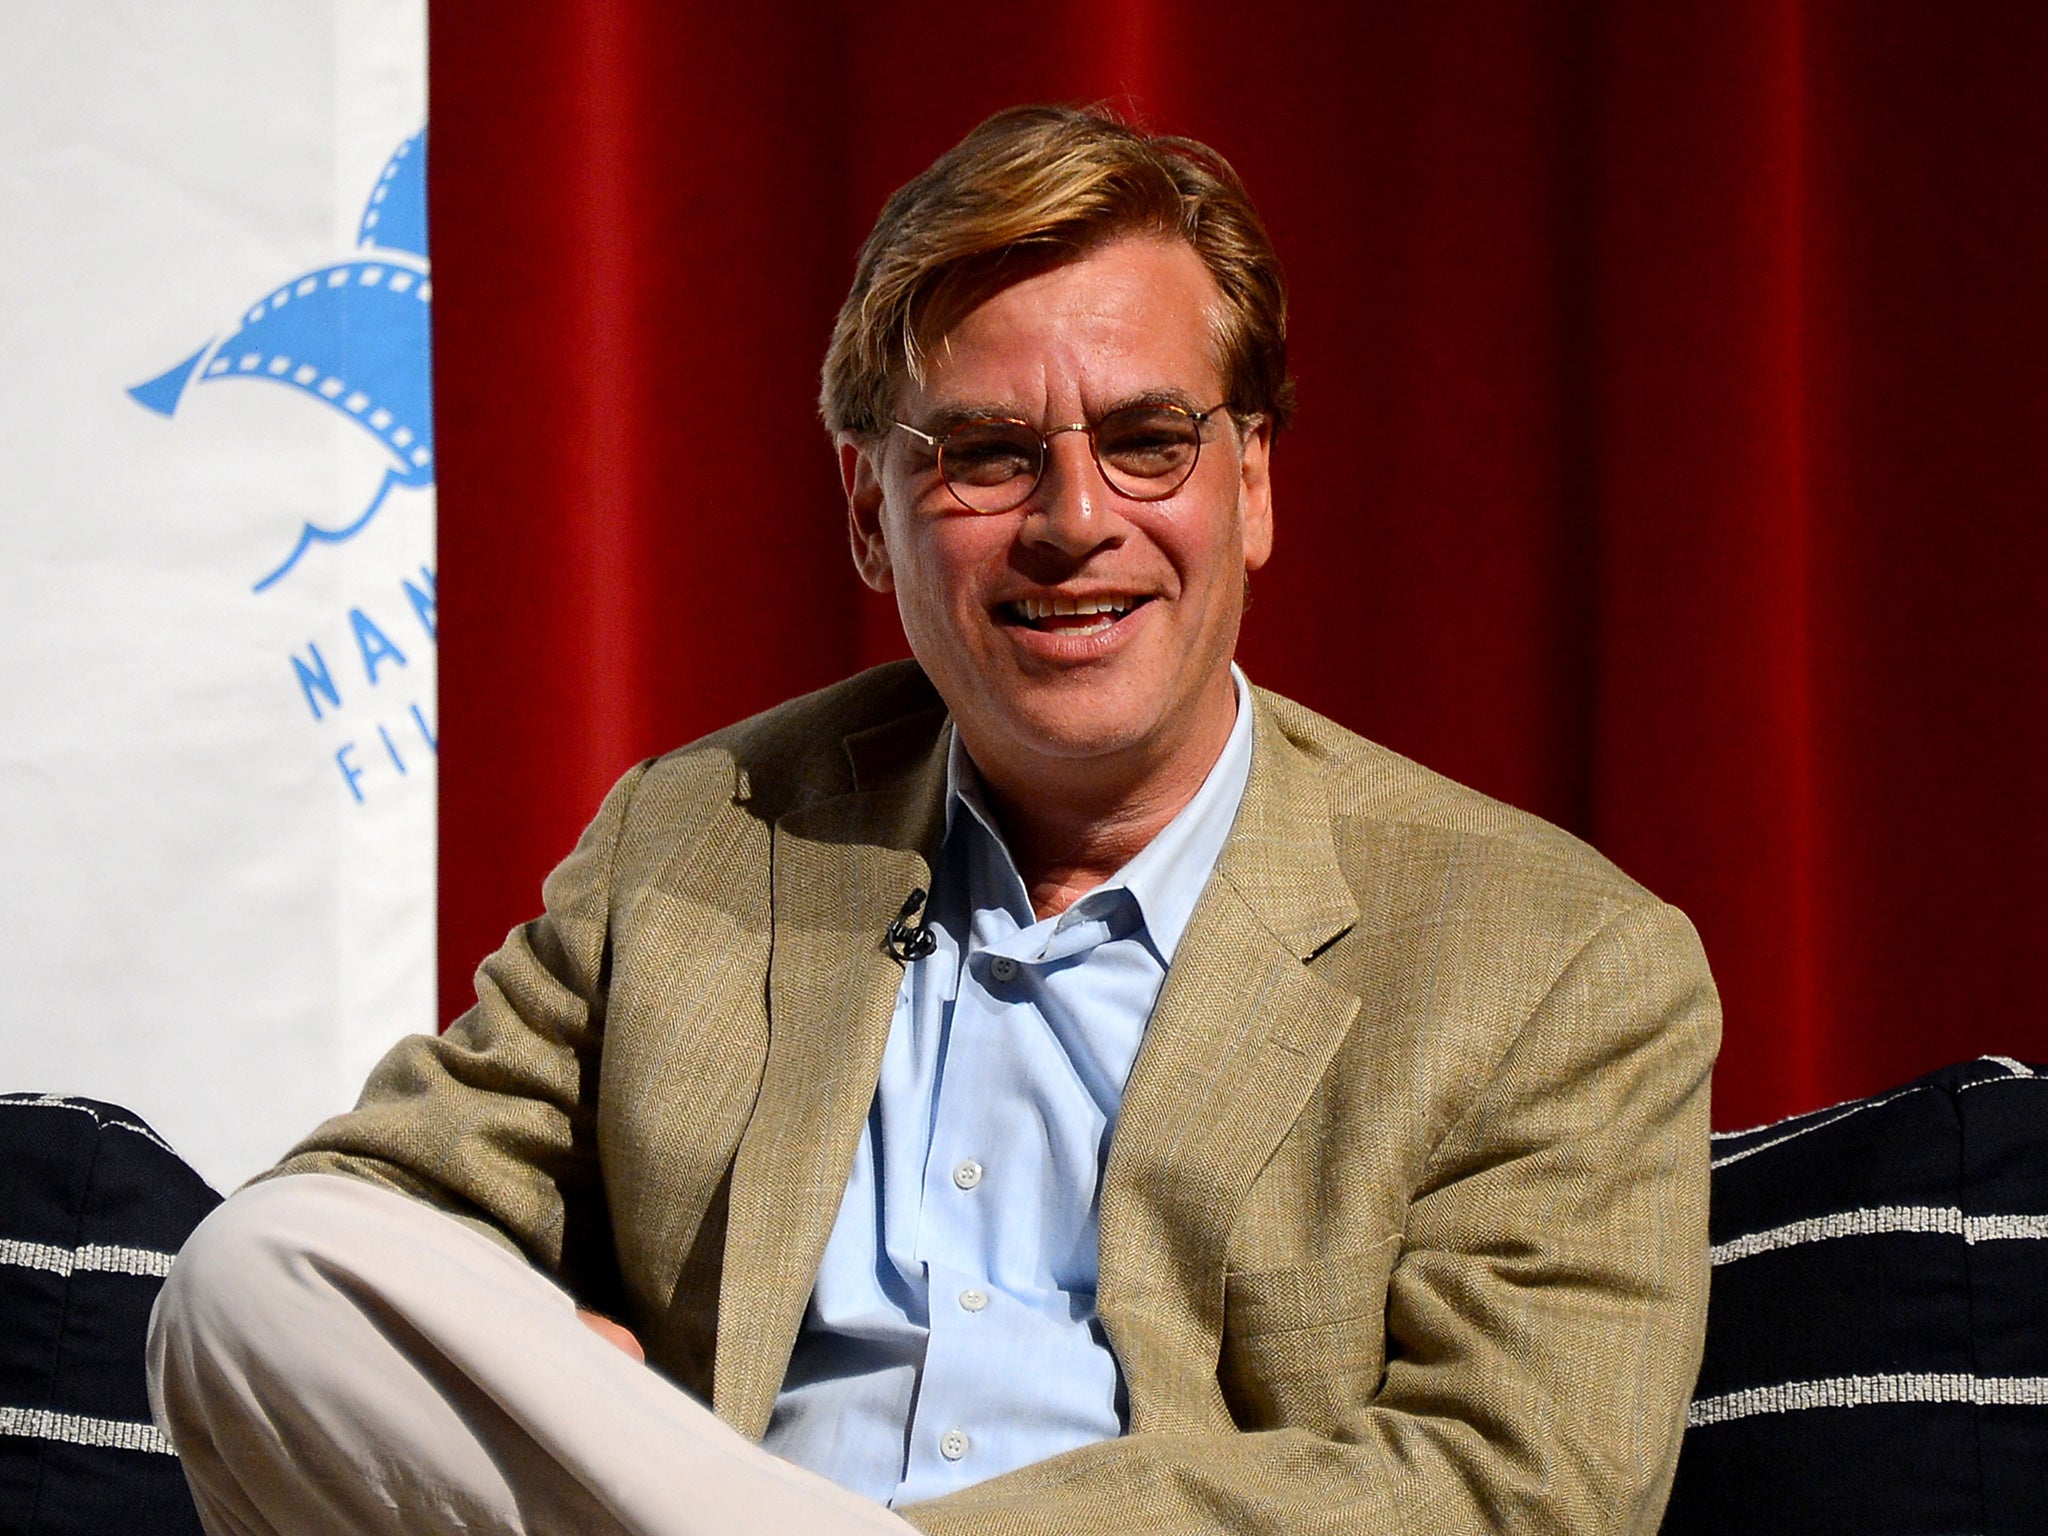 Aaron Sorkin: ‘At the family dinner table, I loved the sound of smart people arguing’ (Theo Wargo/Getty)